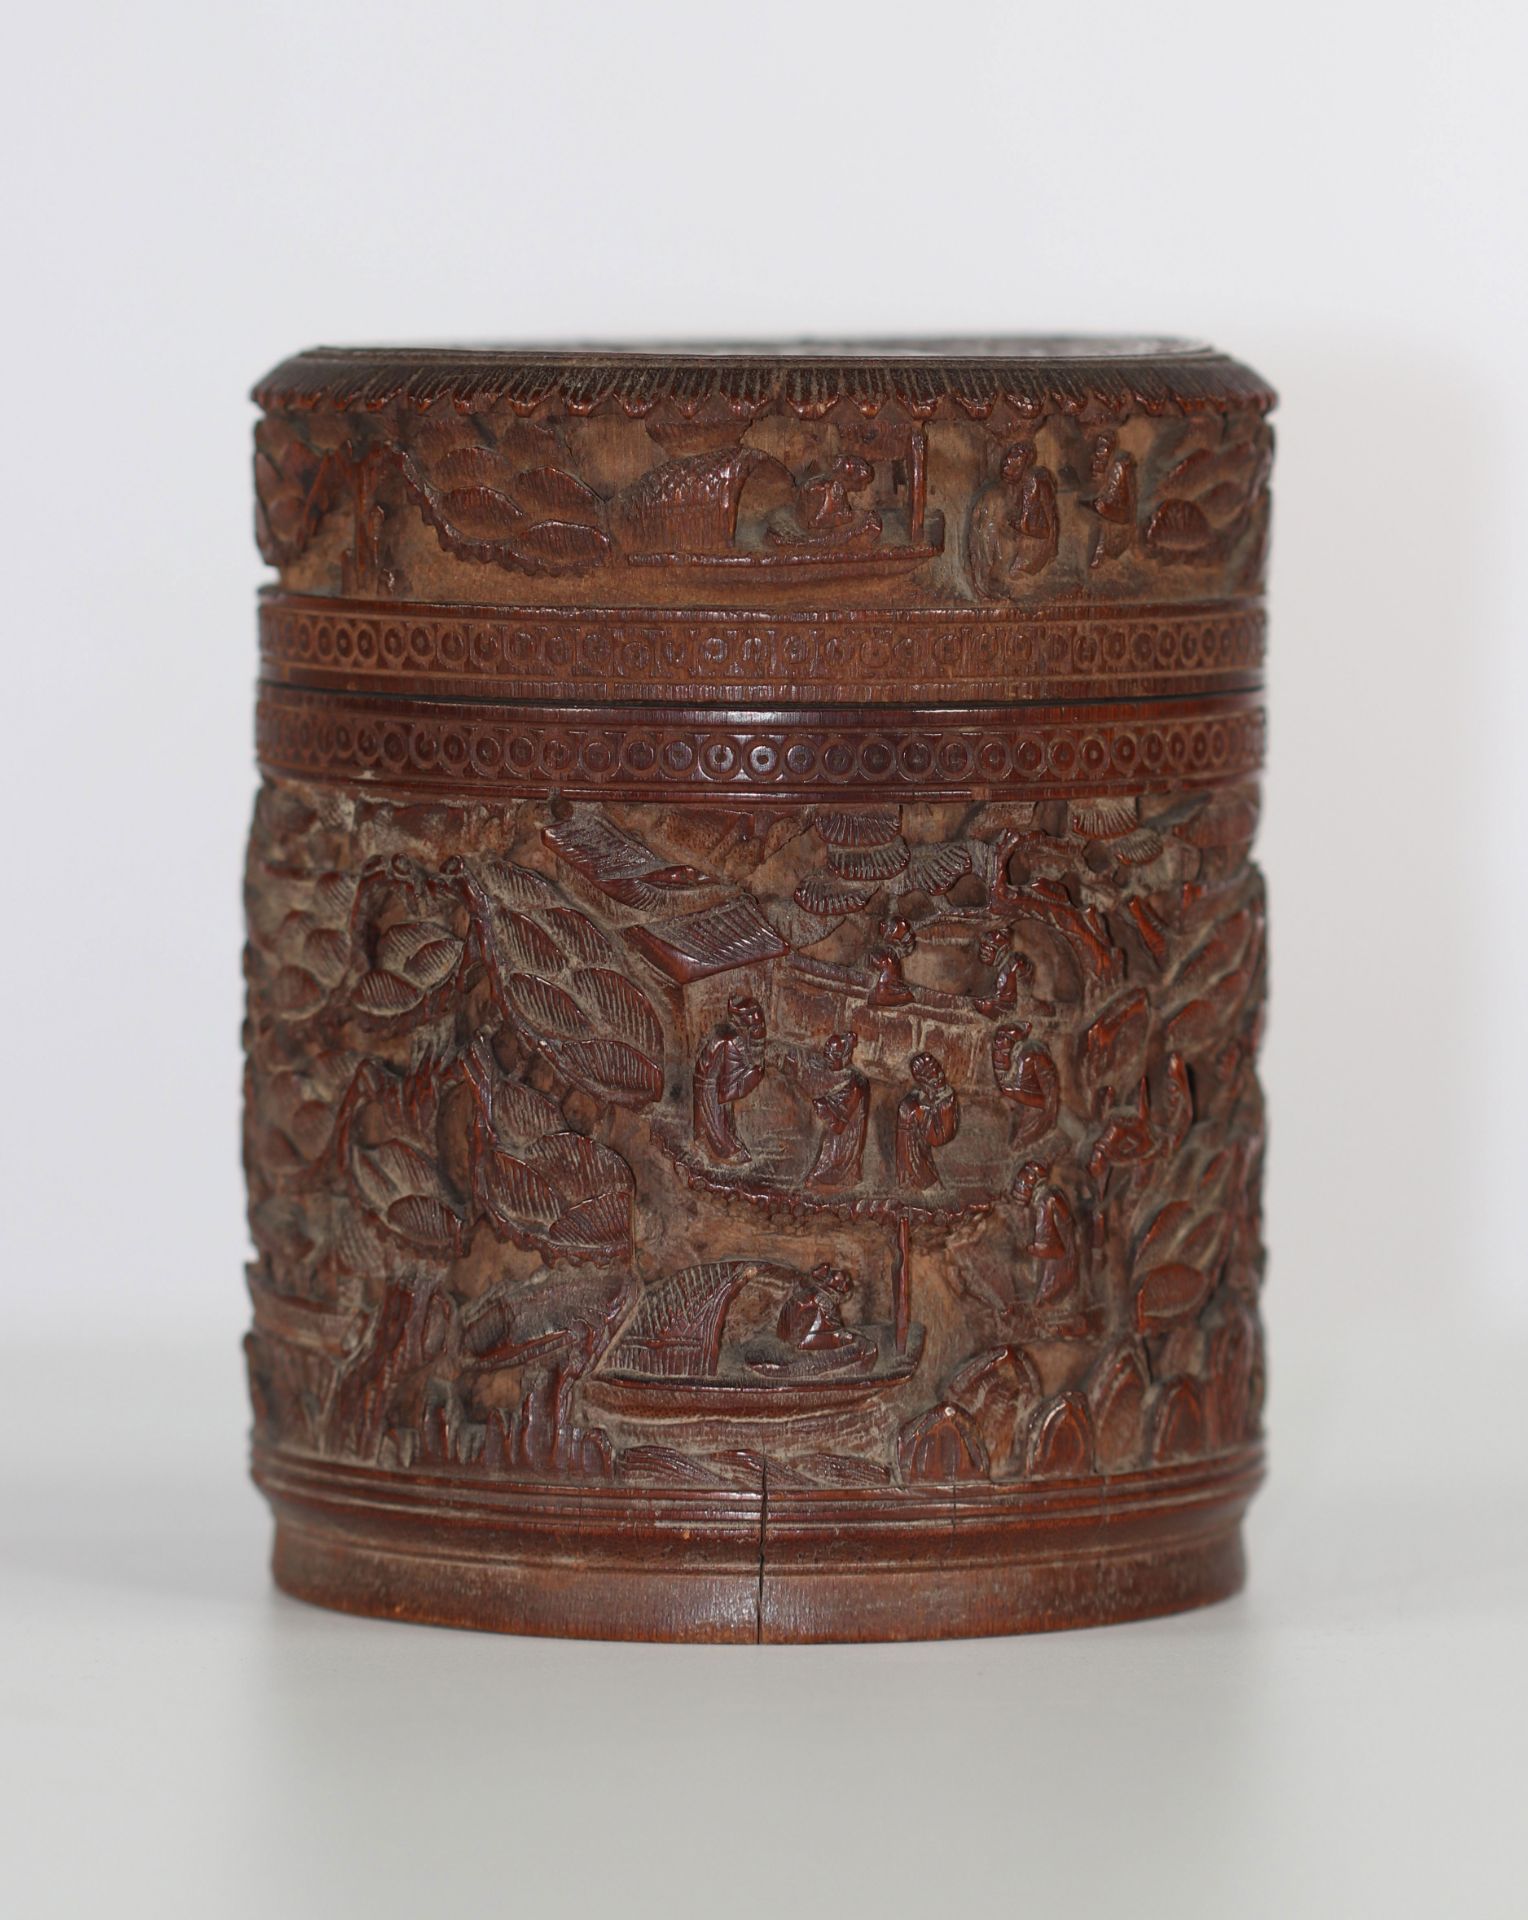 bamboo box the lid with jade inlay.China late nineteenth. - Image 4 of 6